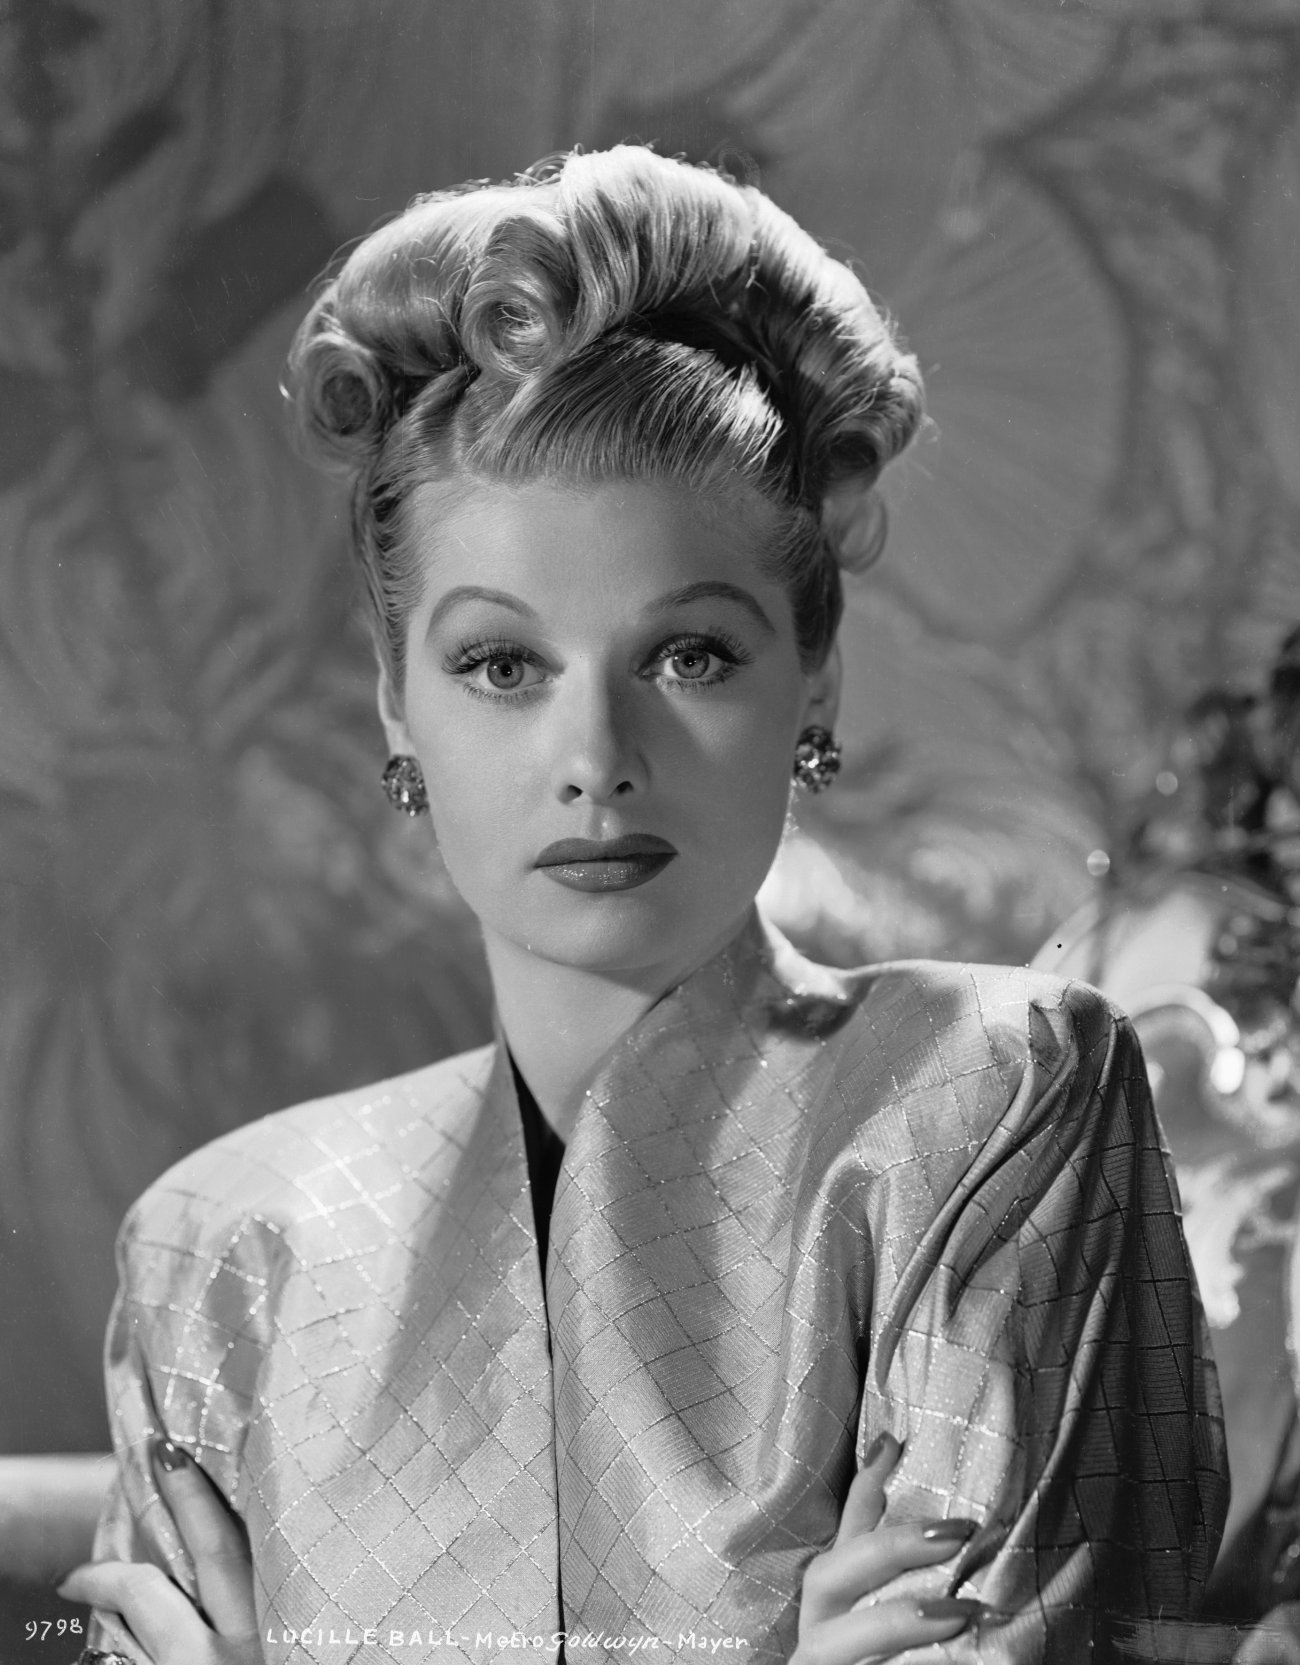 Lucille ball and wedding flowers